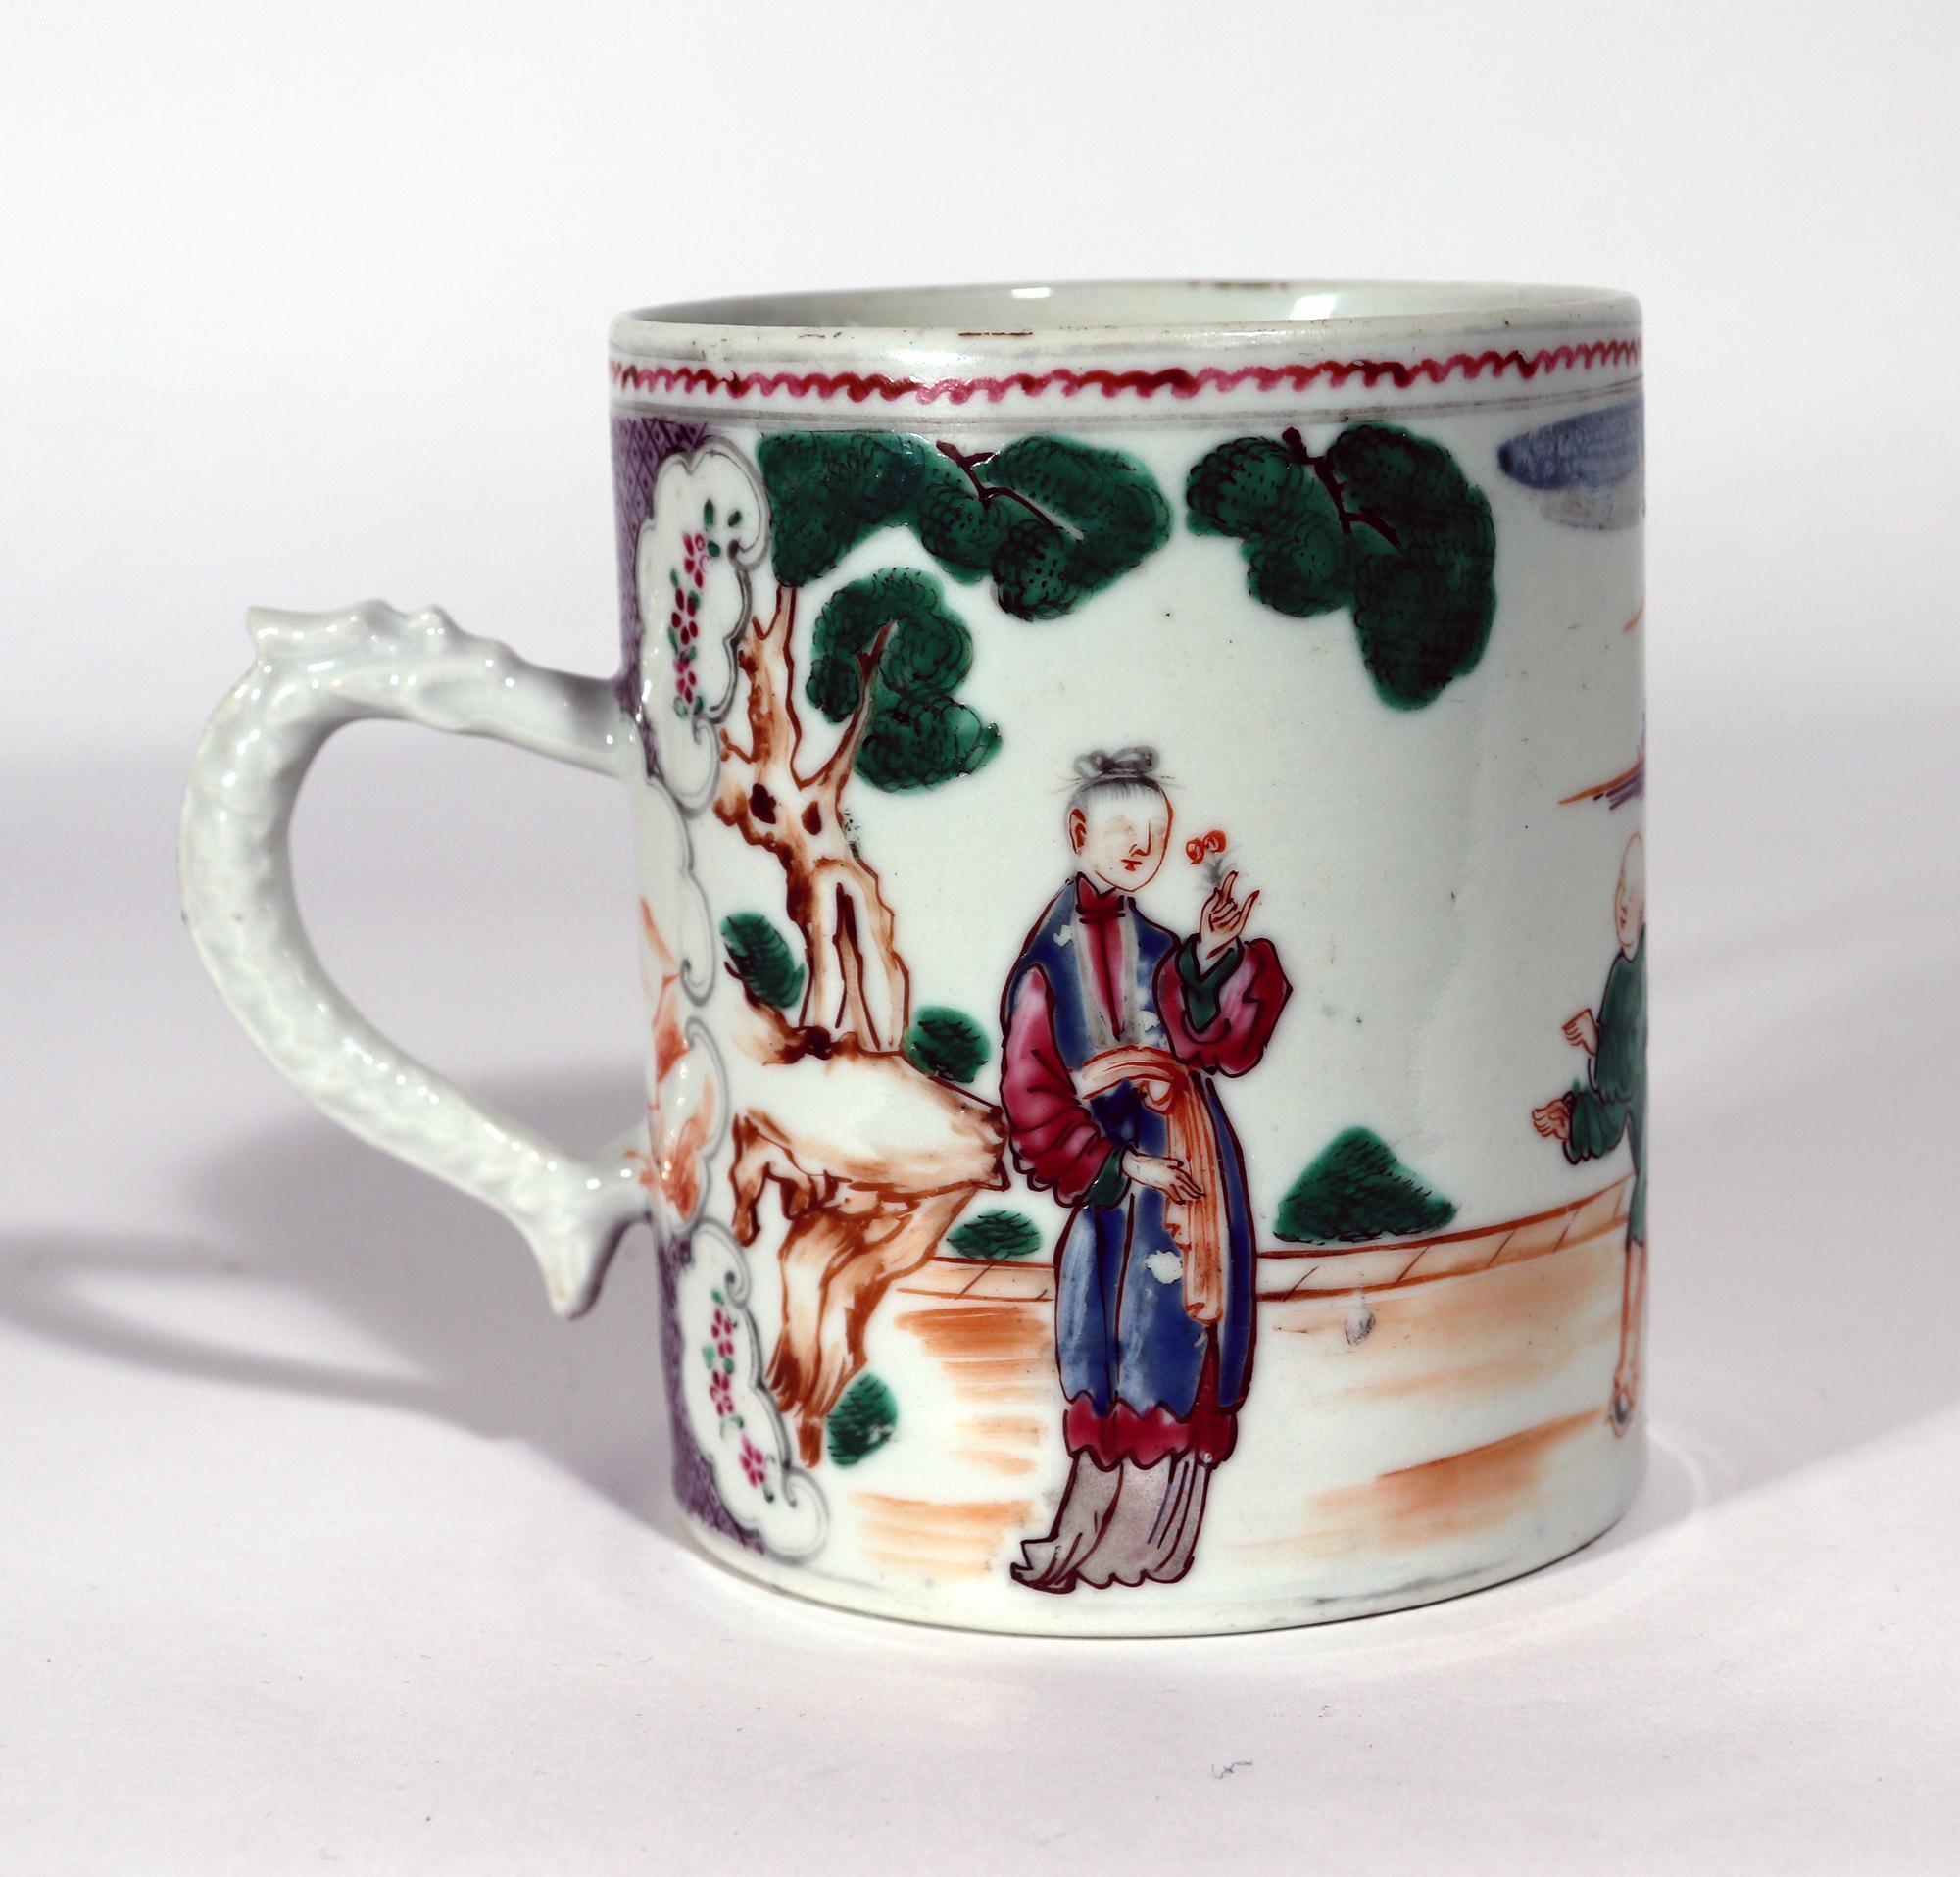 Chinese Export Porcelain Mandarin Tankard,
Circa 1785

The late 18th century Chinese Export porcelain mug has a dragon handle and is painted in famille rose with Mandarin figures.  A continuous panel from the base of the handles depicts a woman